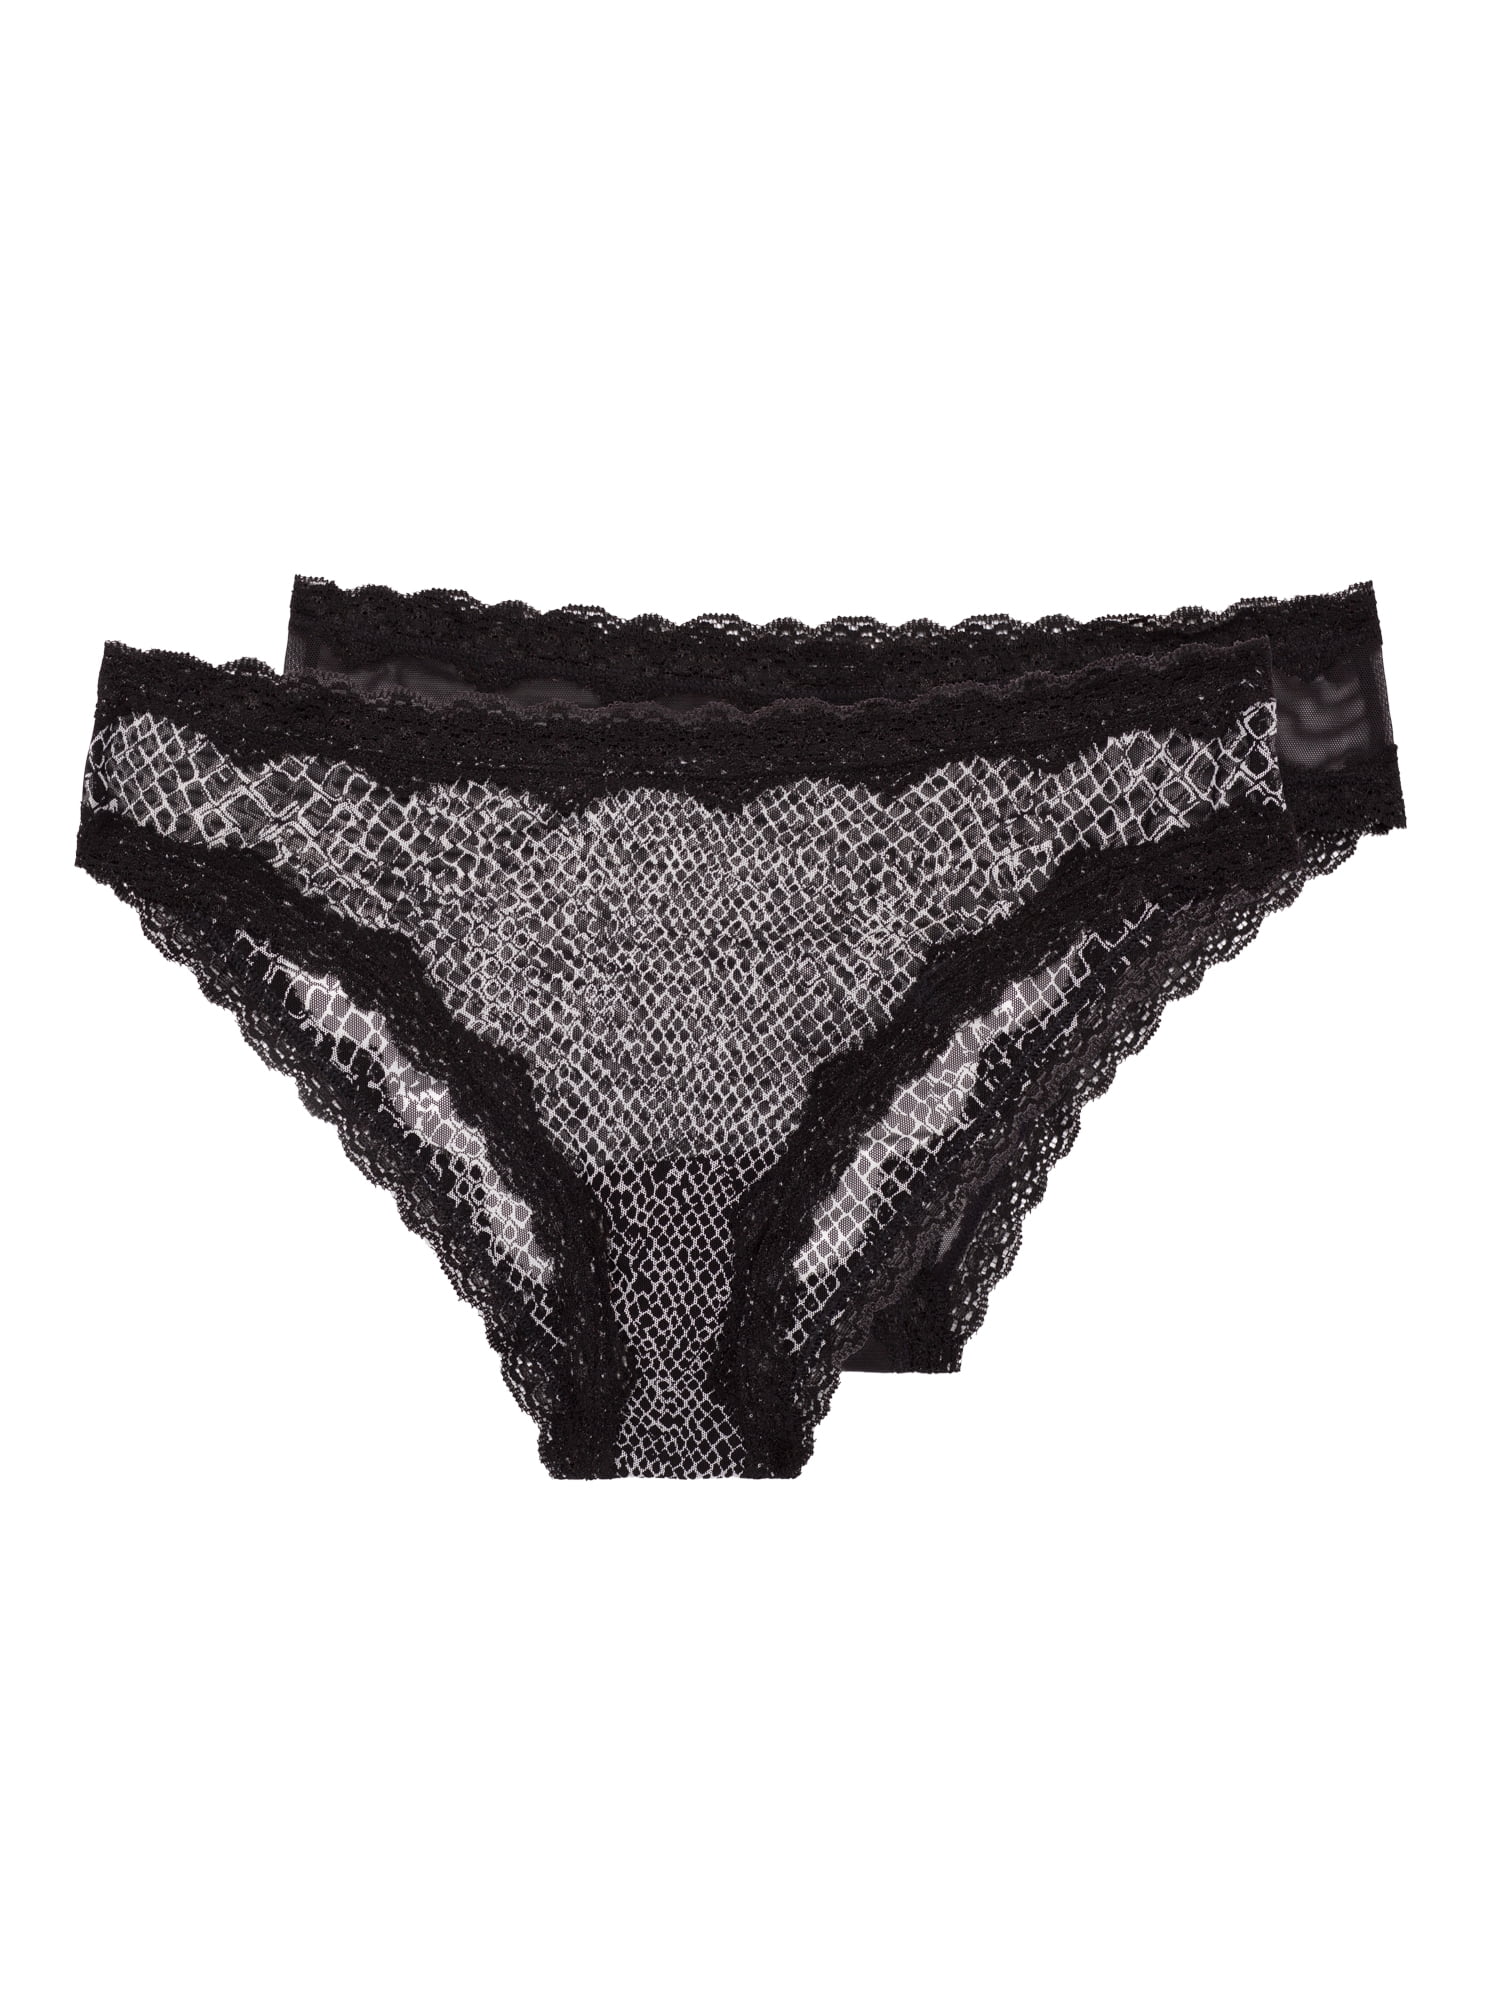 Smart & Sexy Women's Lace Trim Cheeky Panties, 2-pack, Style-SA1377